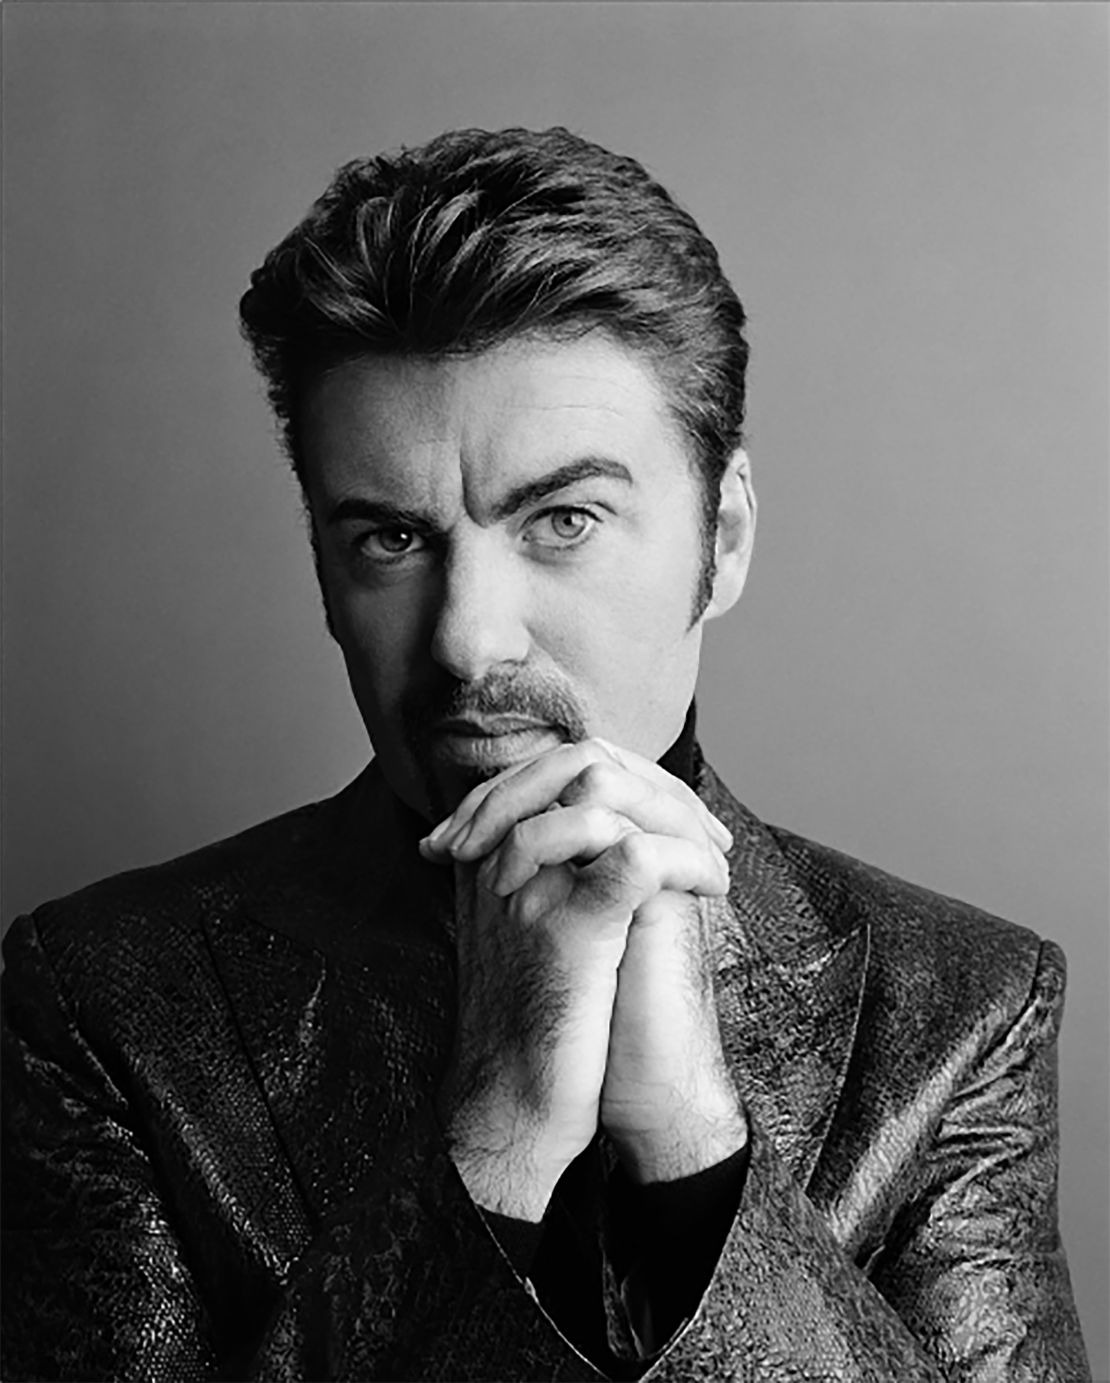 George Michael photographed by Rankin.